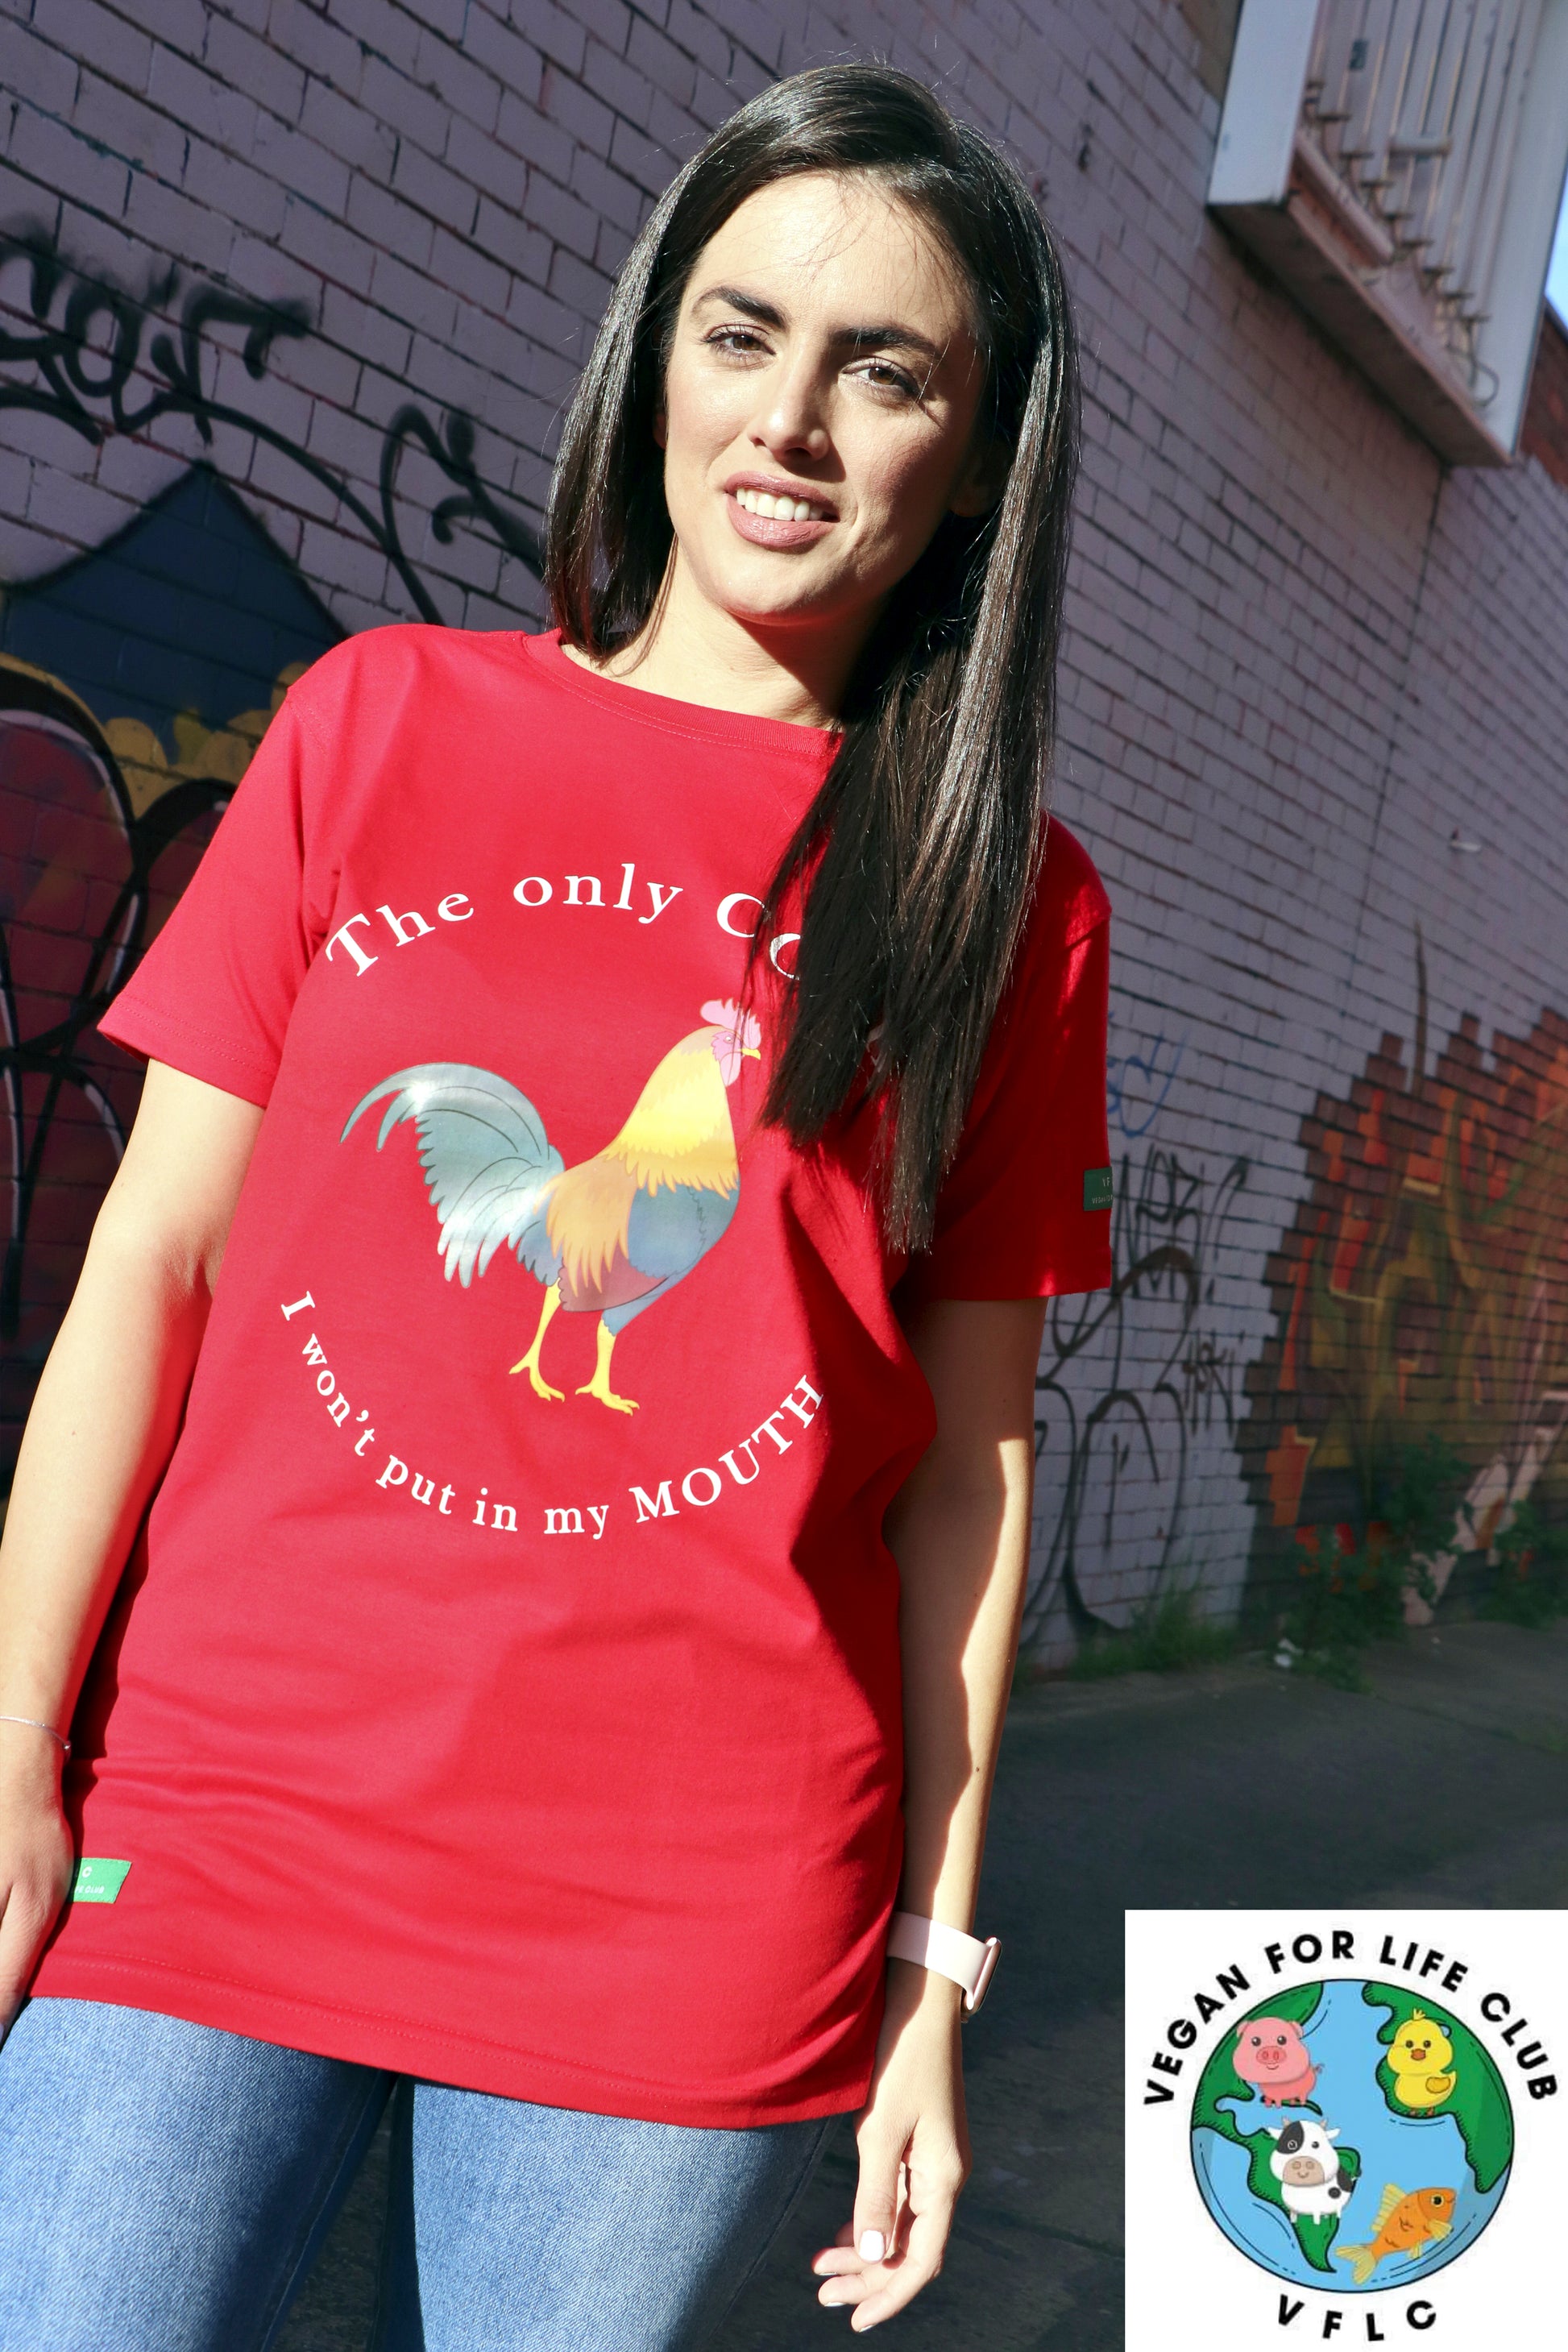 THE ONLY COCK I WONT PUT IN MY MOUTH Tee! - VEGAN FOR LIFE CLUB